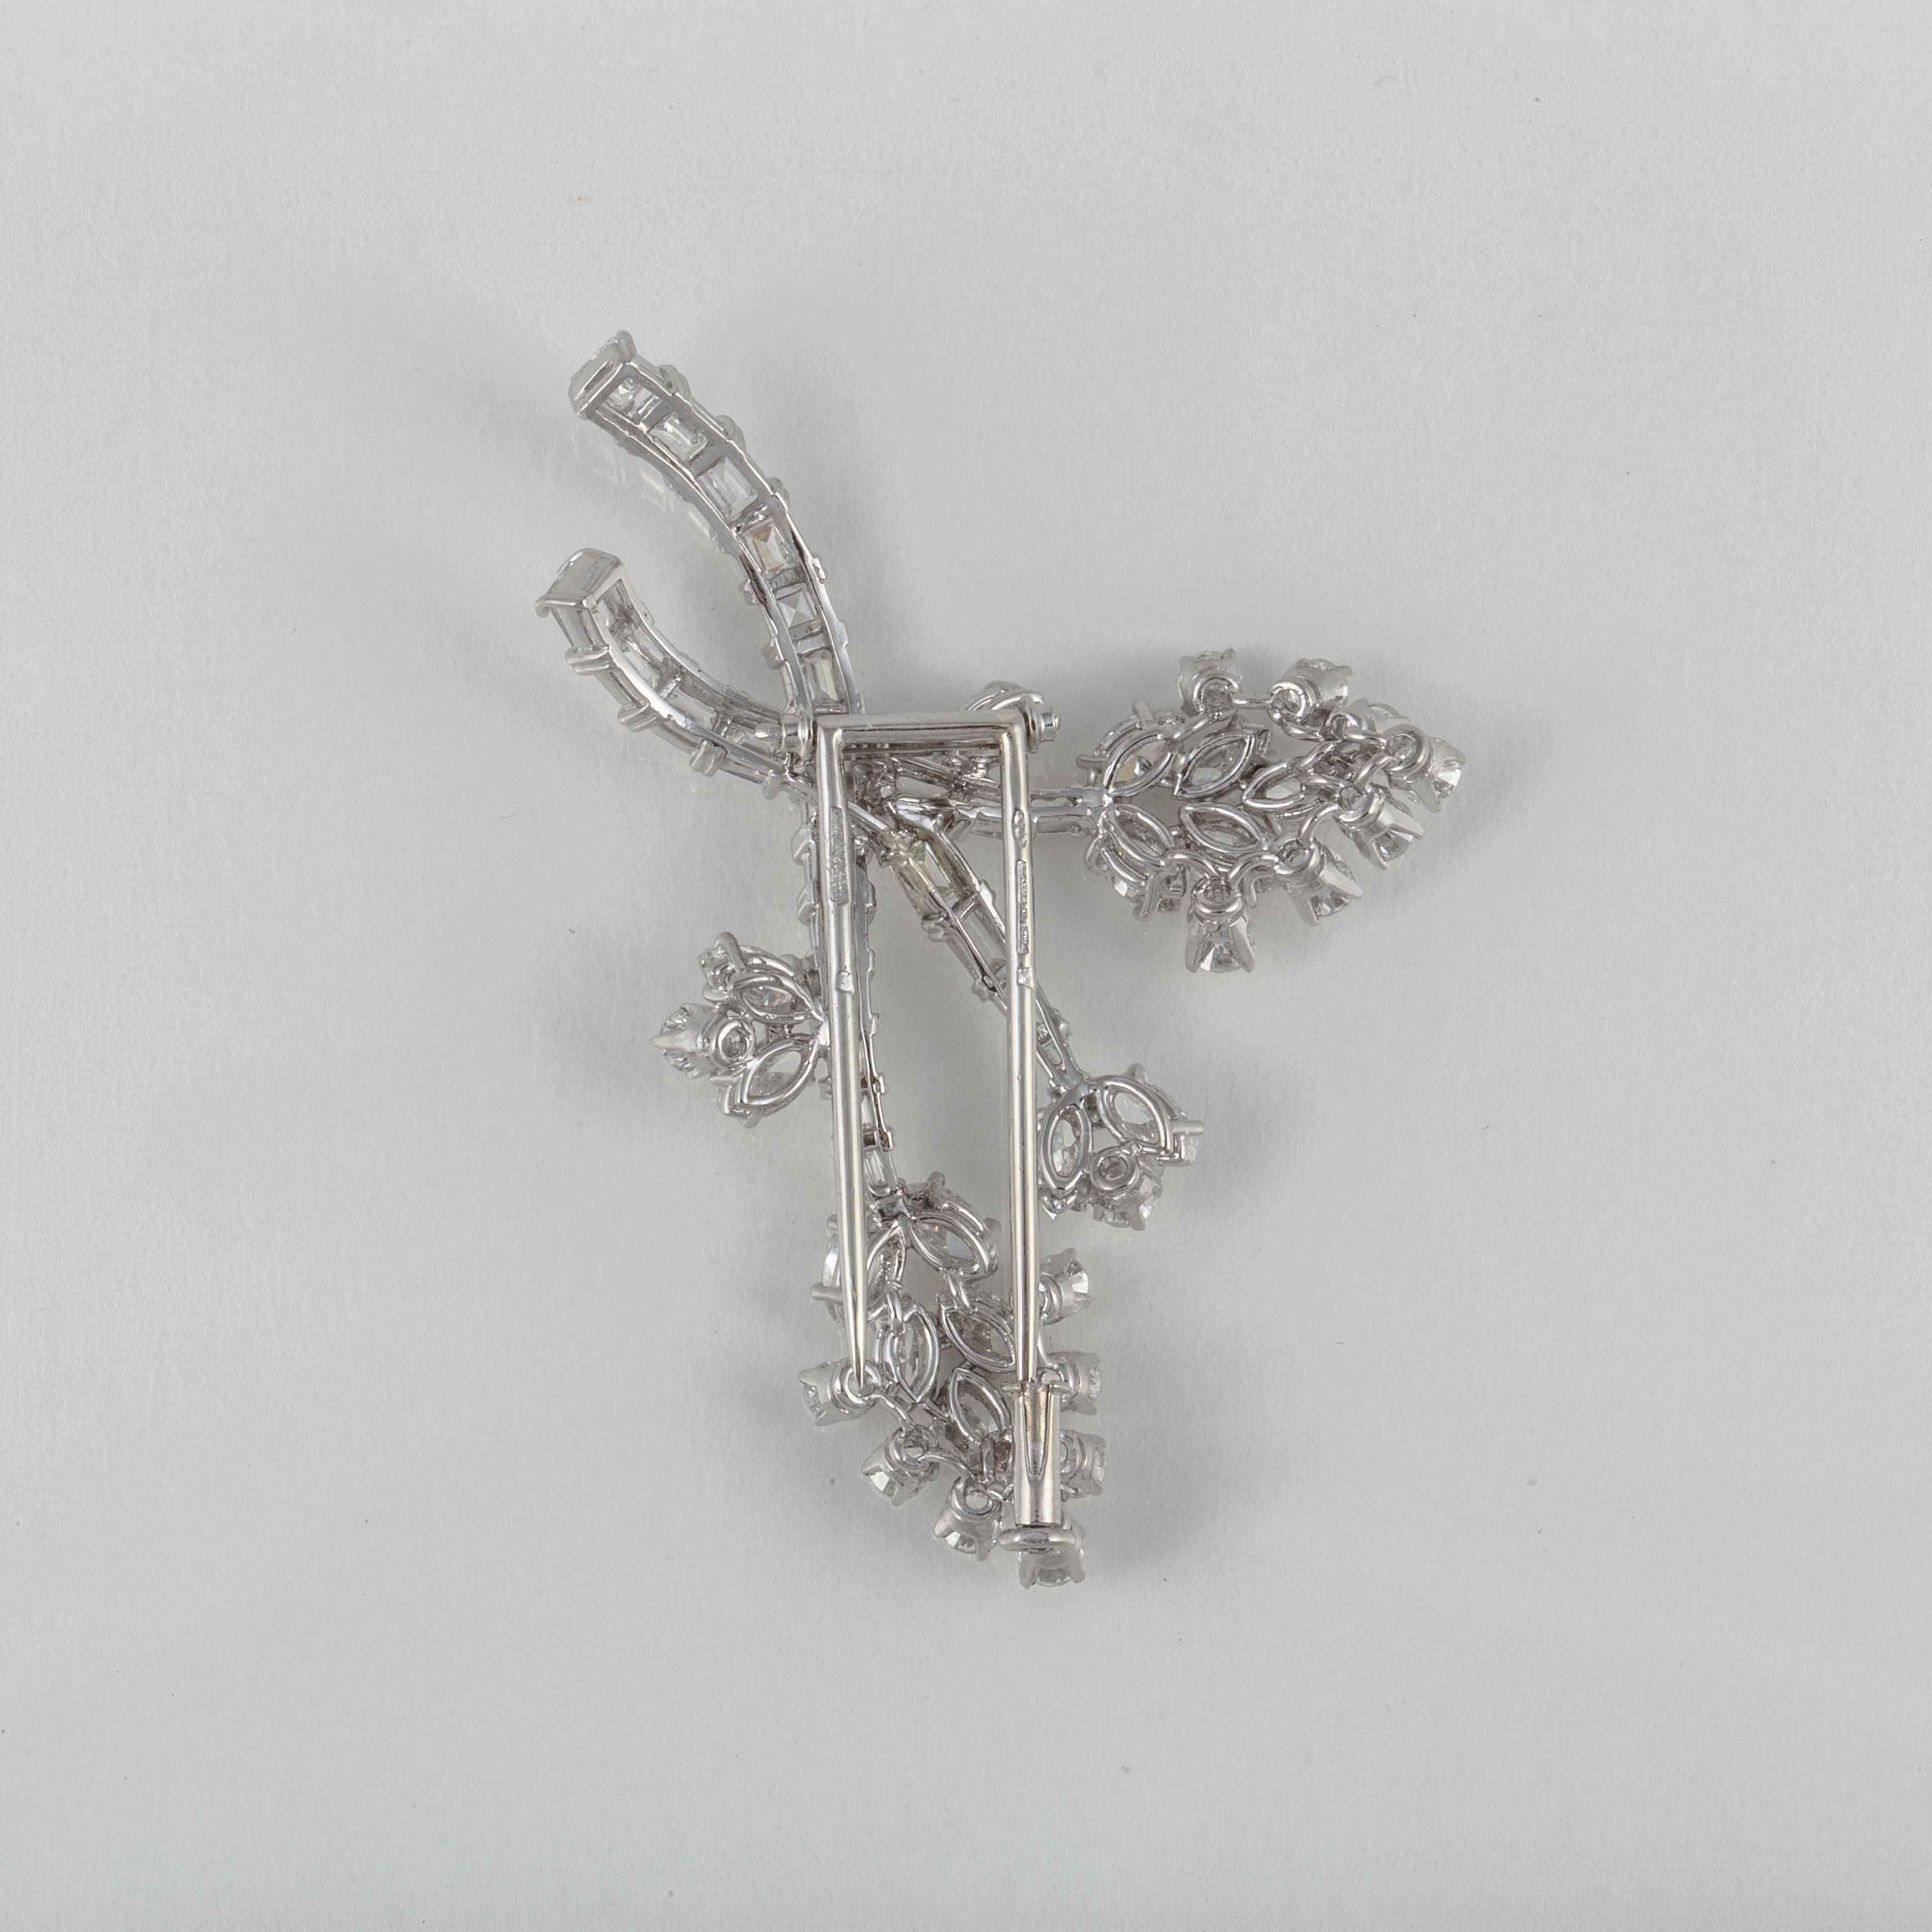 Platinum brooch featuring a spray of round, baguette and marquise diamonds.  There are 16 round diamonds that total 1 carat, 25 baguette diamonds that total 2 carats and 15 marquise diamonds that total 2 carats.  Total diamond weight of the brooch